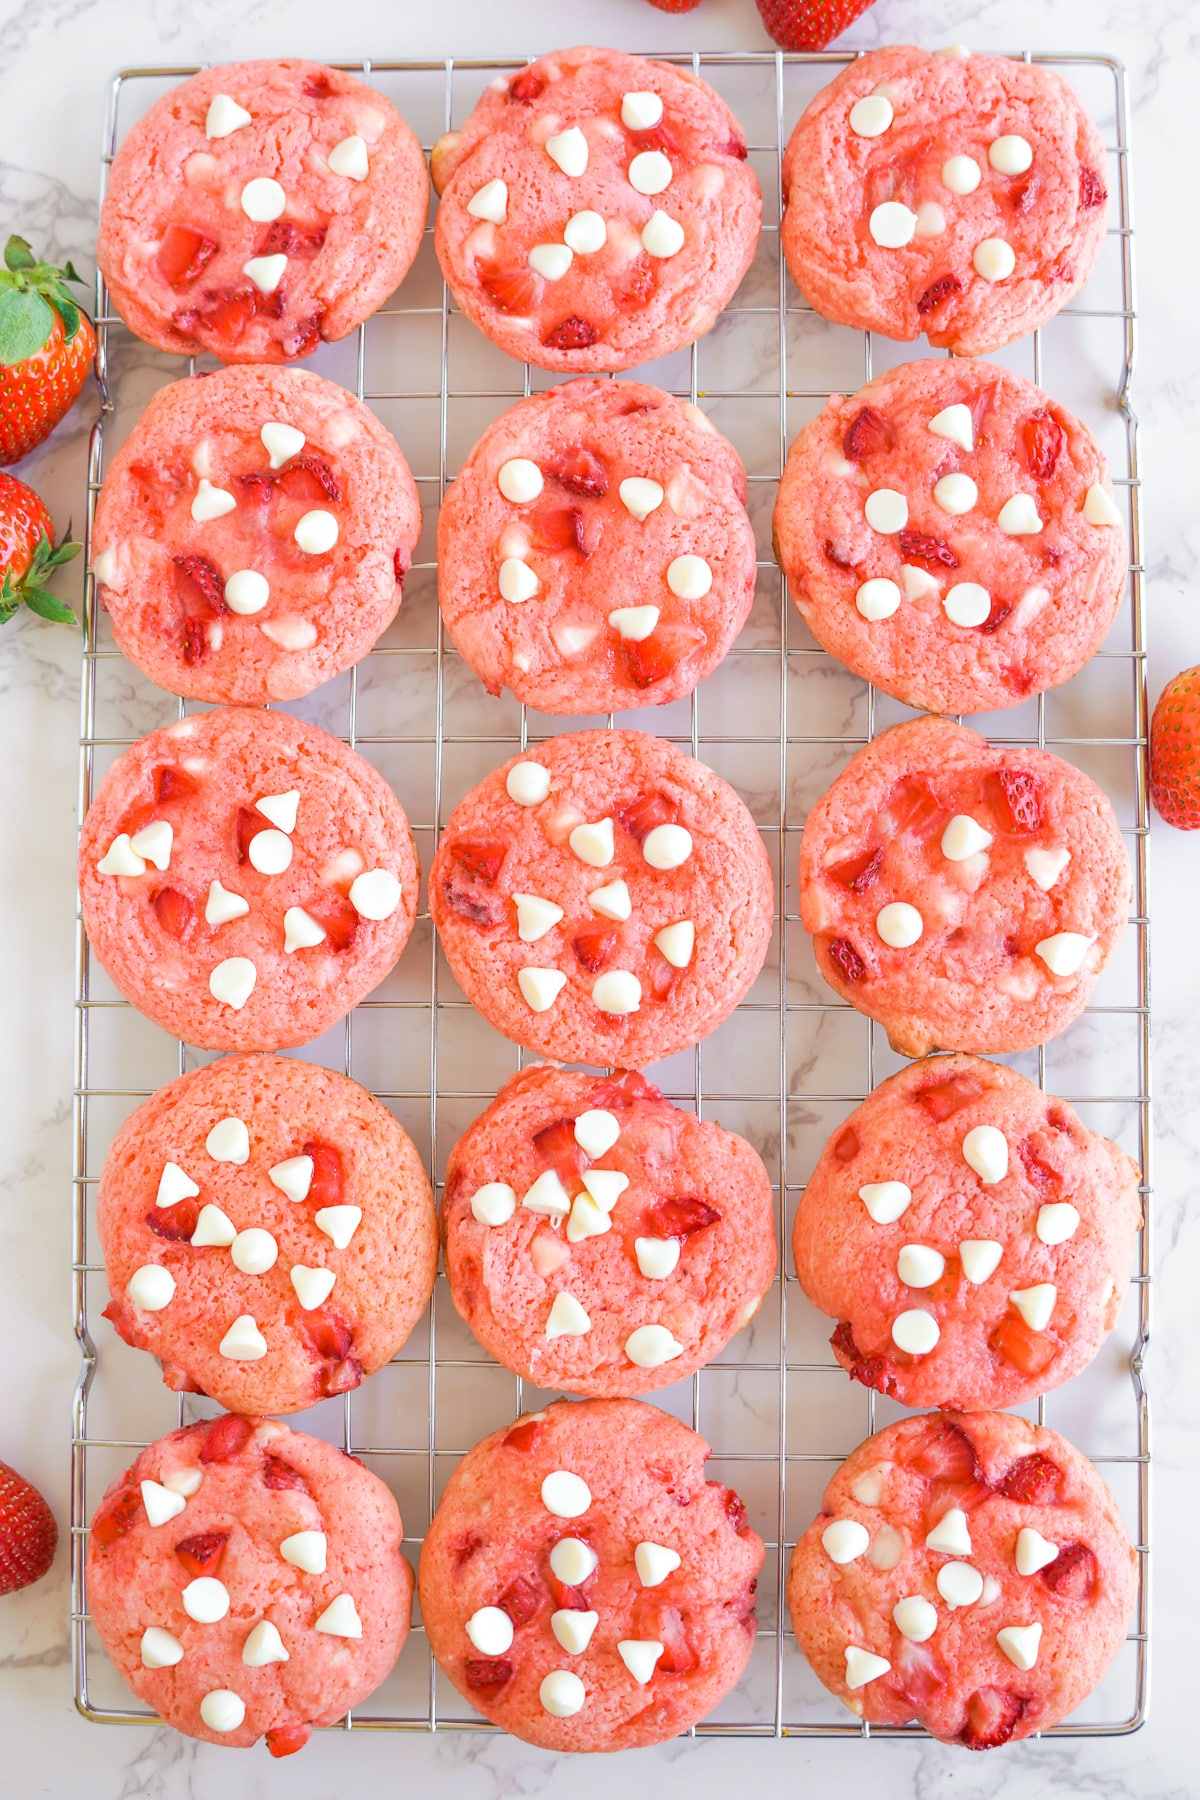 Strawberry cookies topped with white chocolate chips and real strawberry pieces lined up on a wire cooling rack from oeverhead.